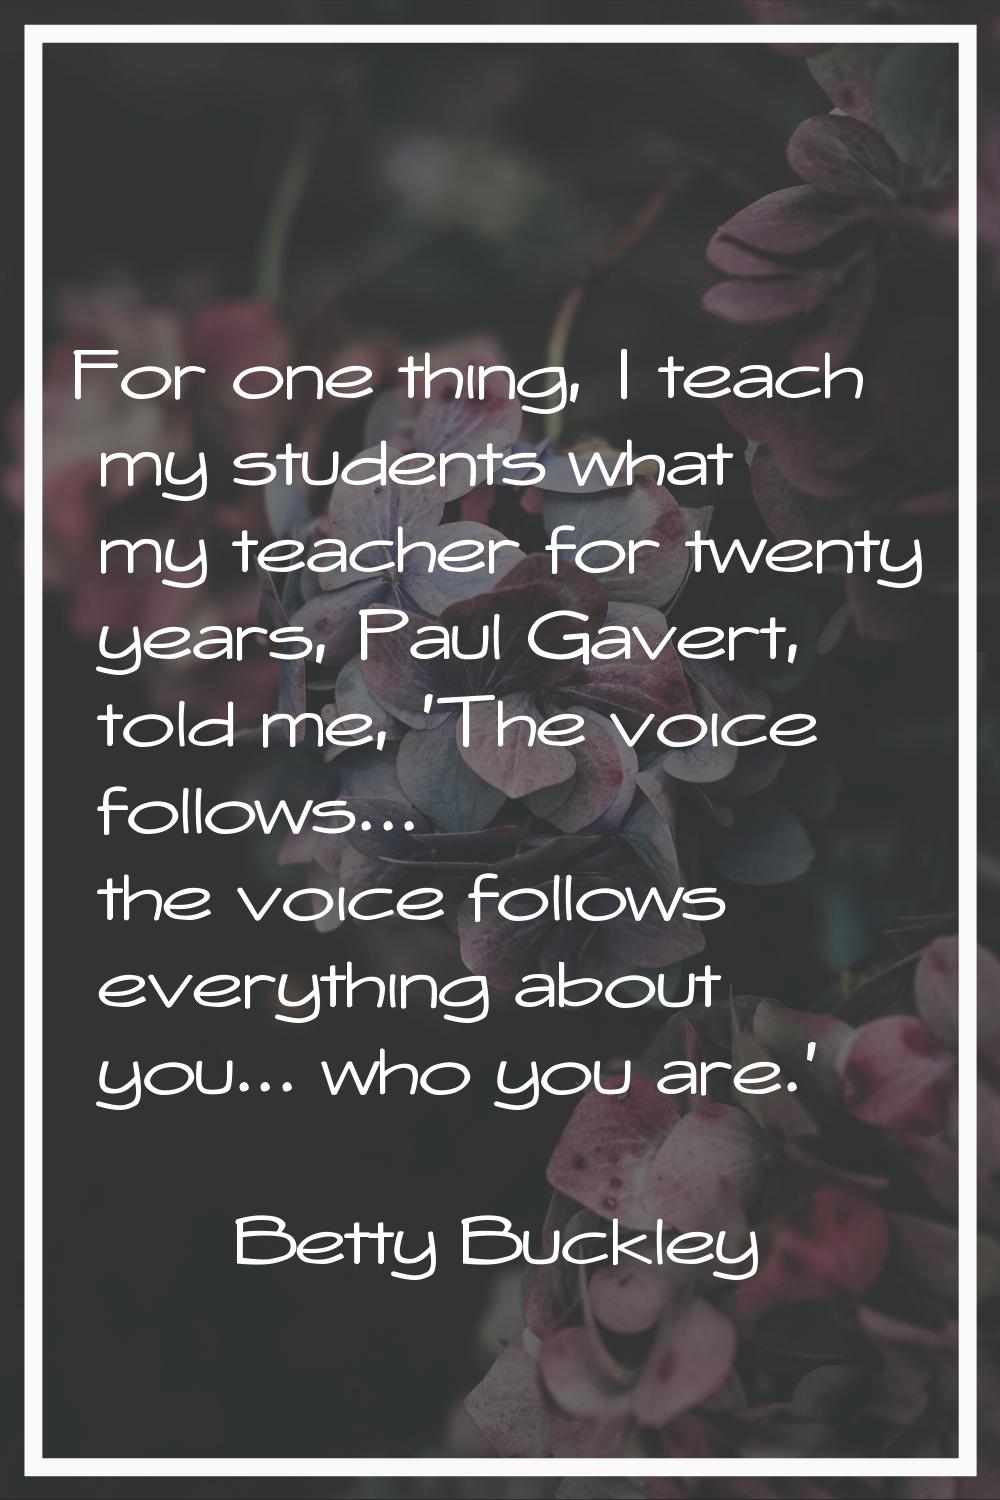 For one thing, I teach my students what my teacher for twenty years, Paul Gavert, told me, 'The voi